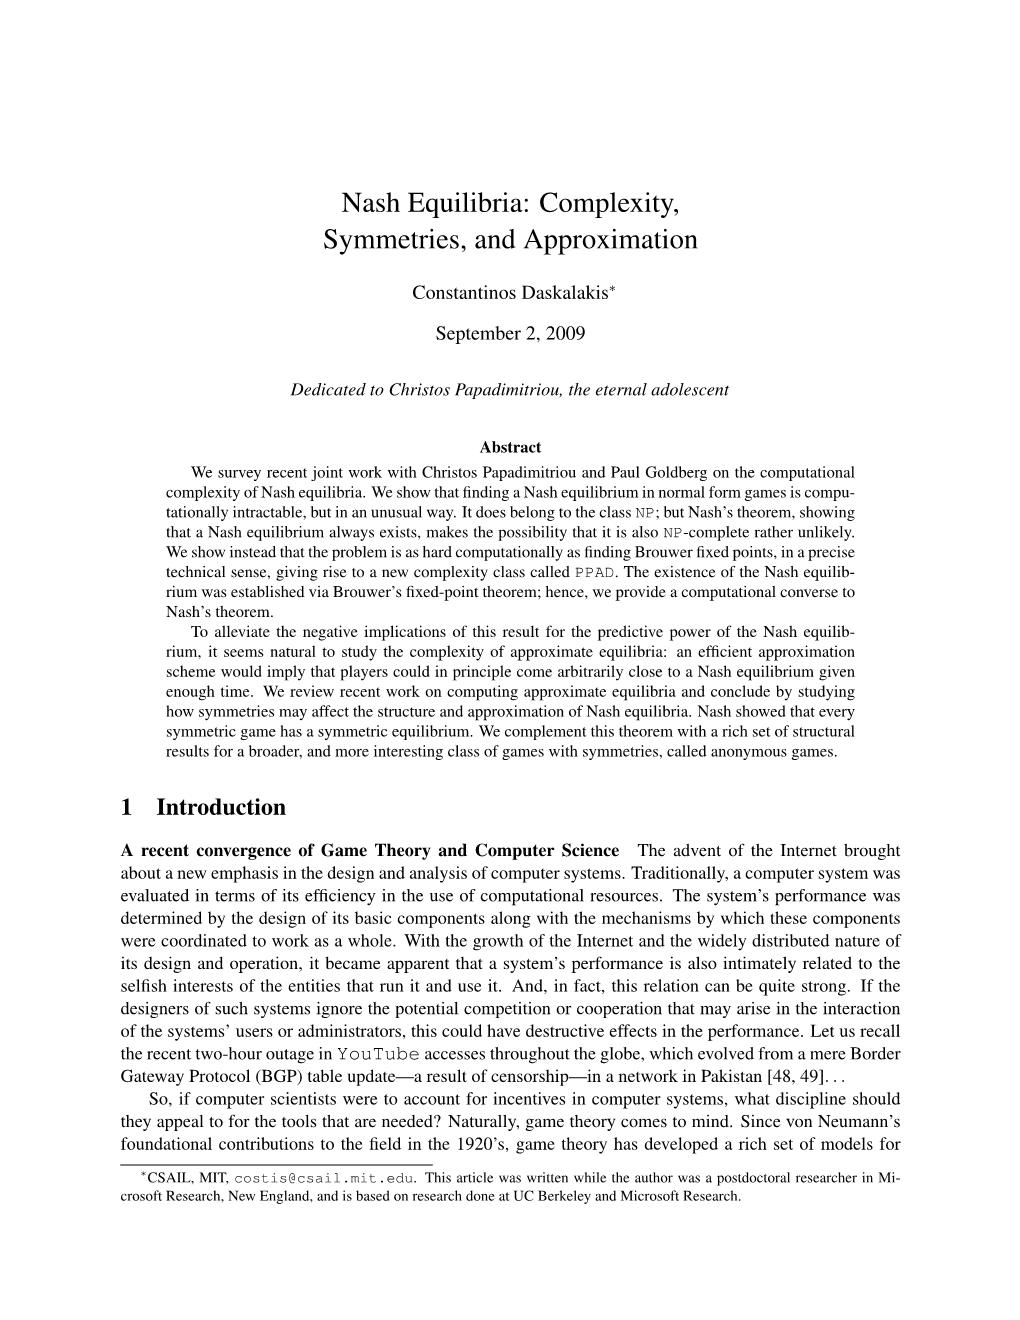 Nash Equilibria: Complexity, Symmetries, and Approximation